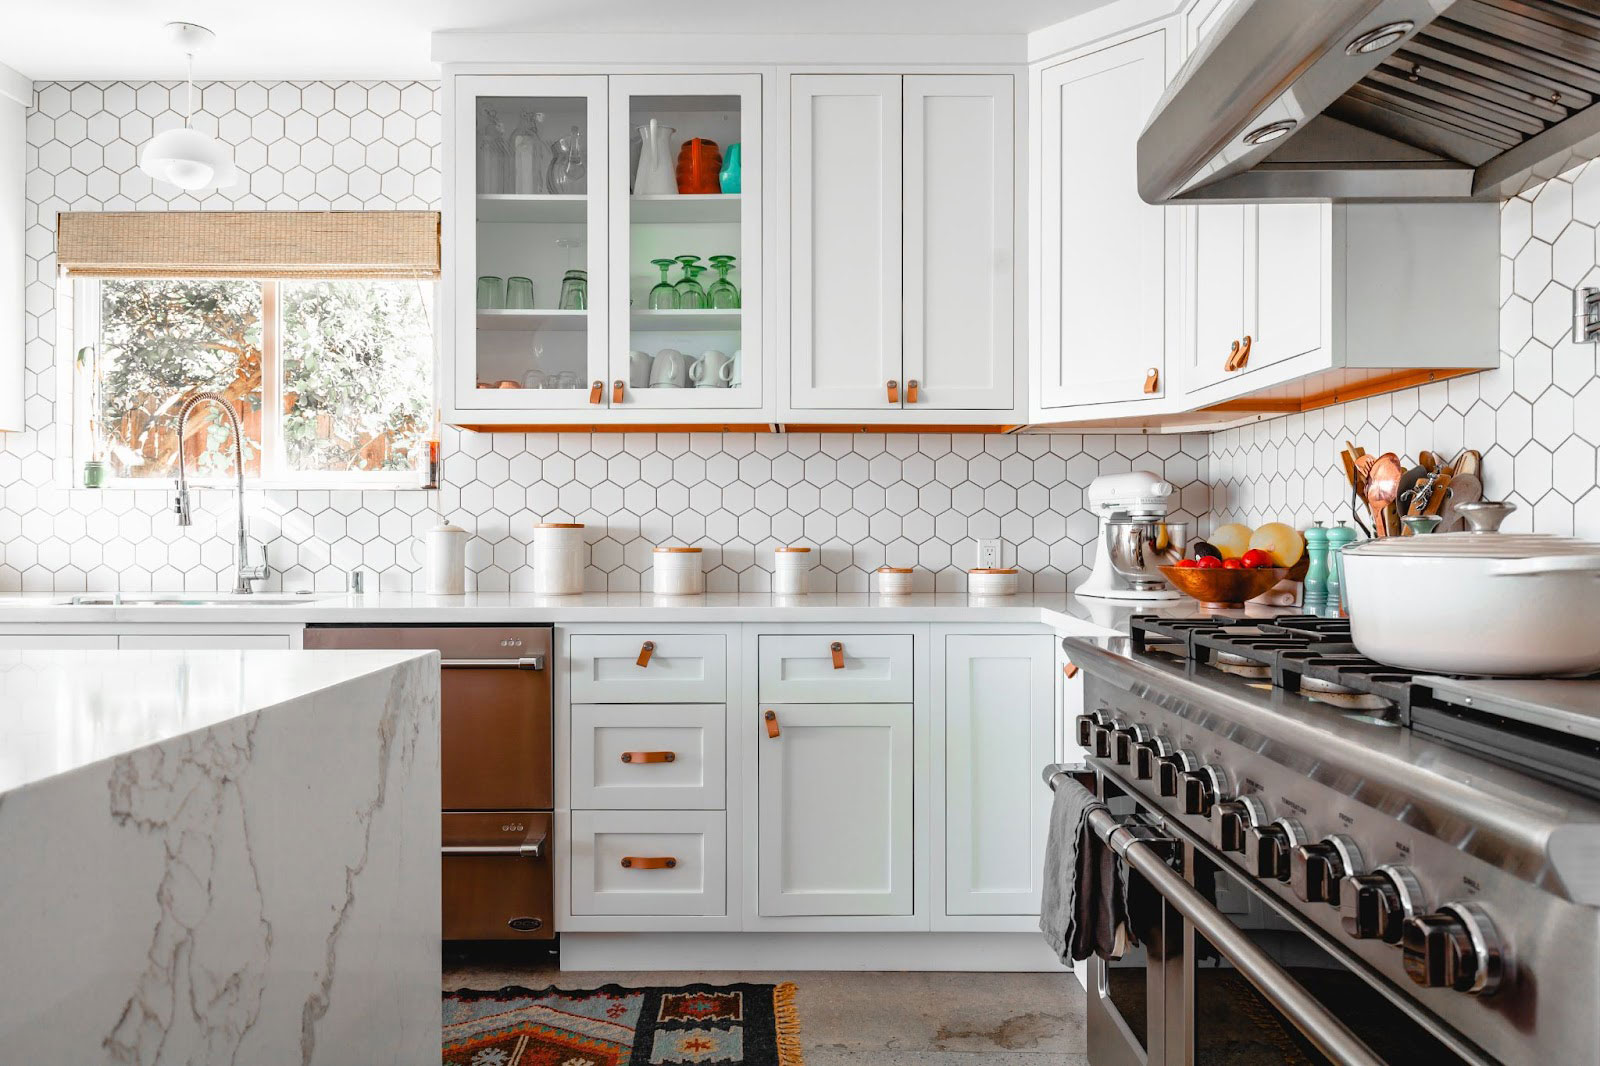 25 Benefits of Having a Professional Take Care of Your Cabinet Restoration